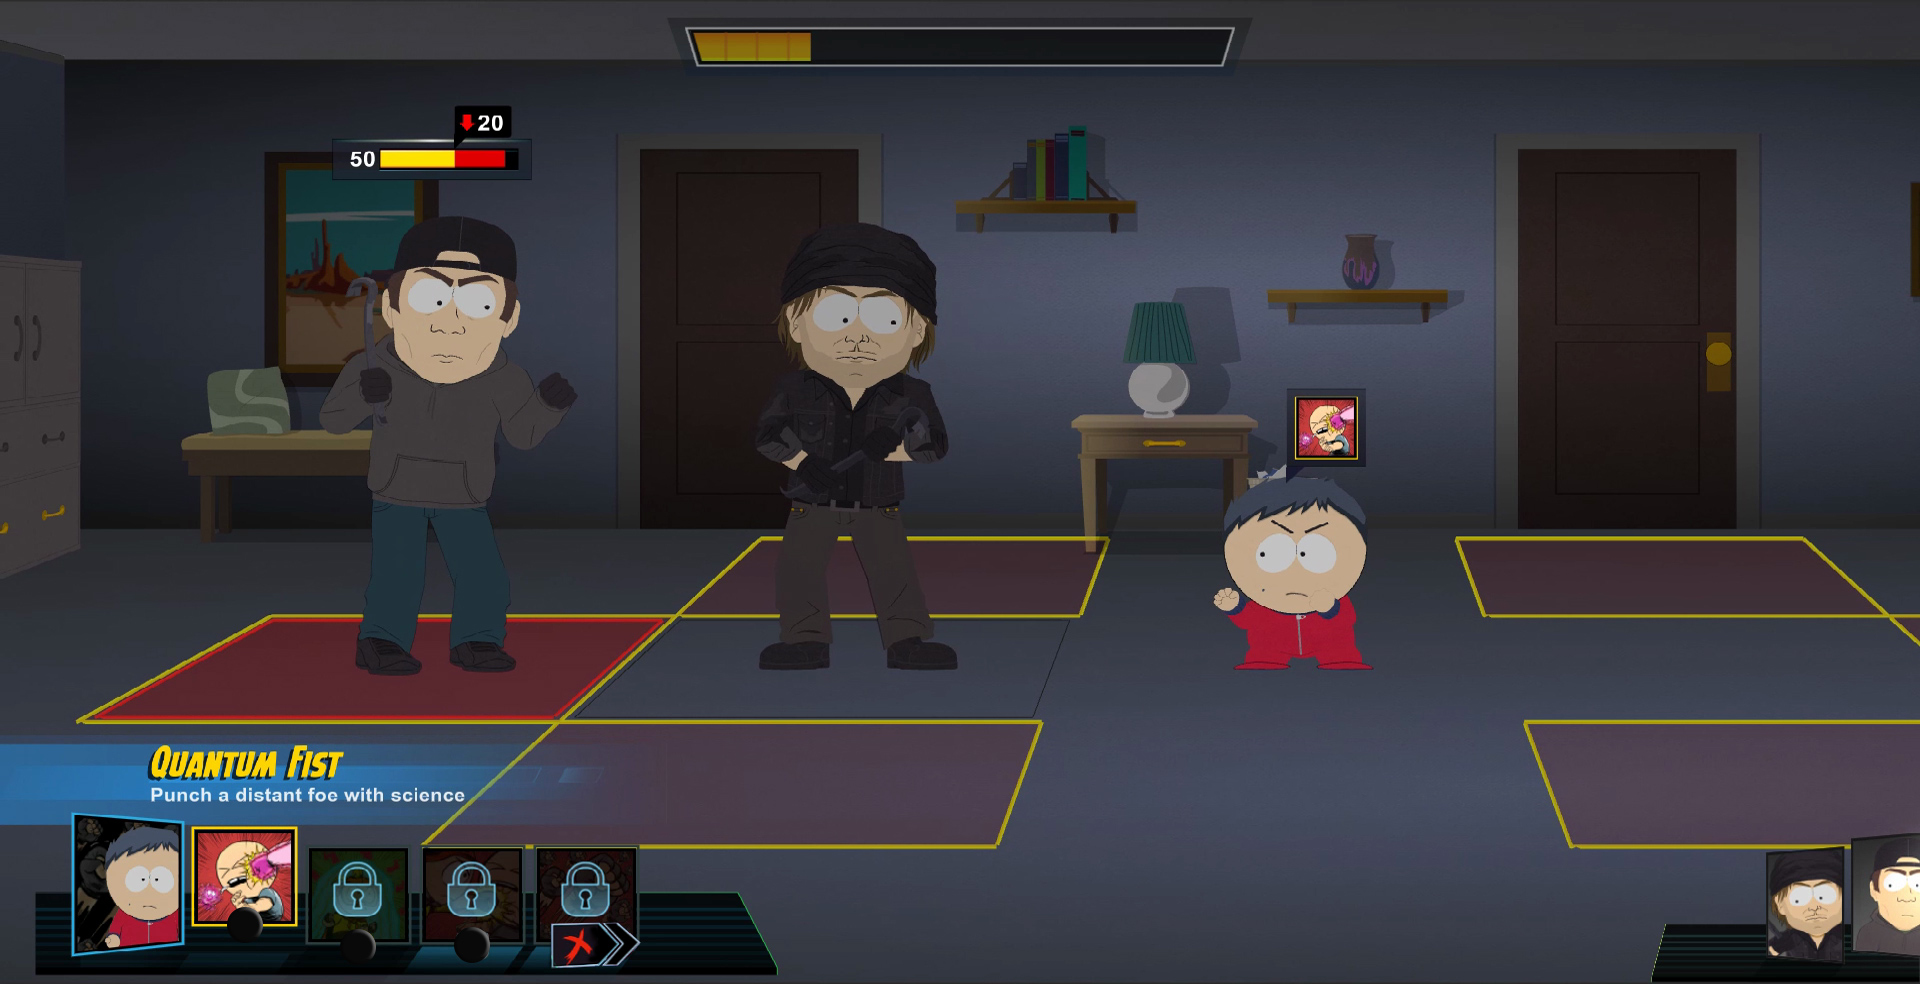 South-Park-The-Fractured-But-Whole-screenshot-44